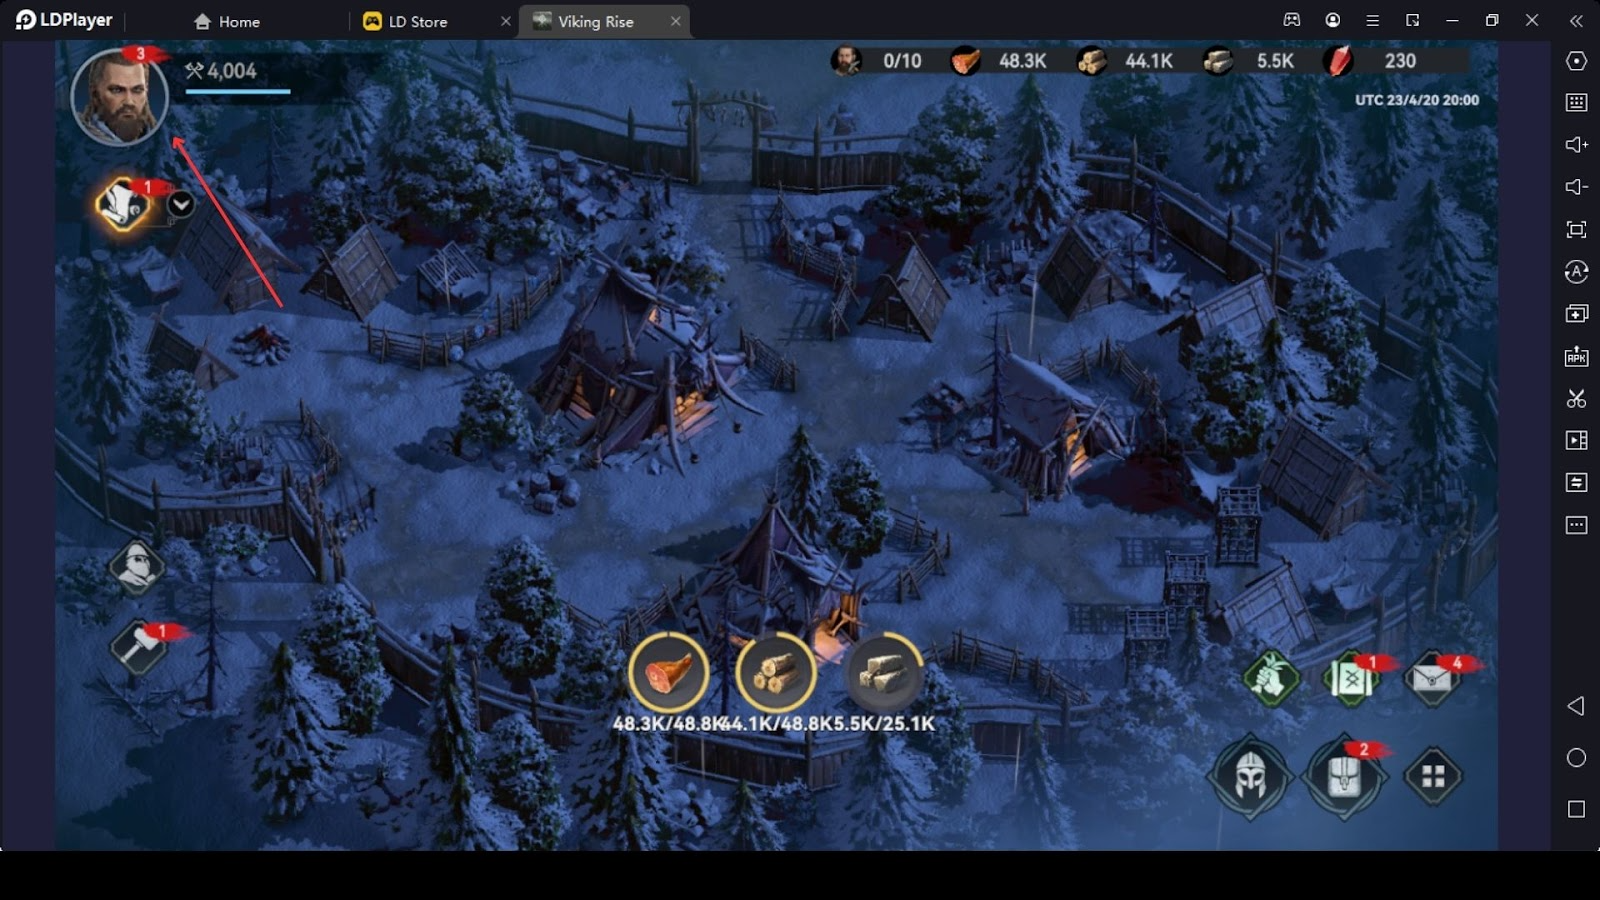 Viking Rise is an upcoming strategy game from the makers of Lords